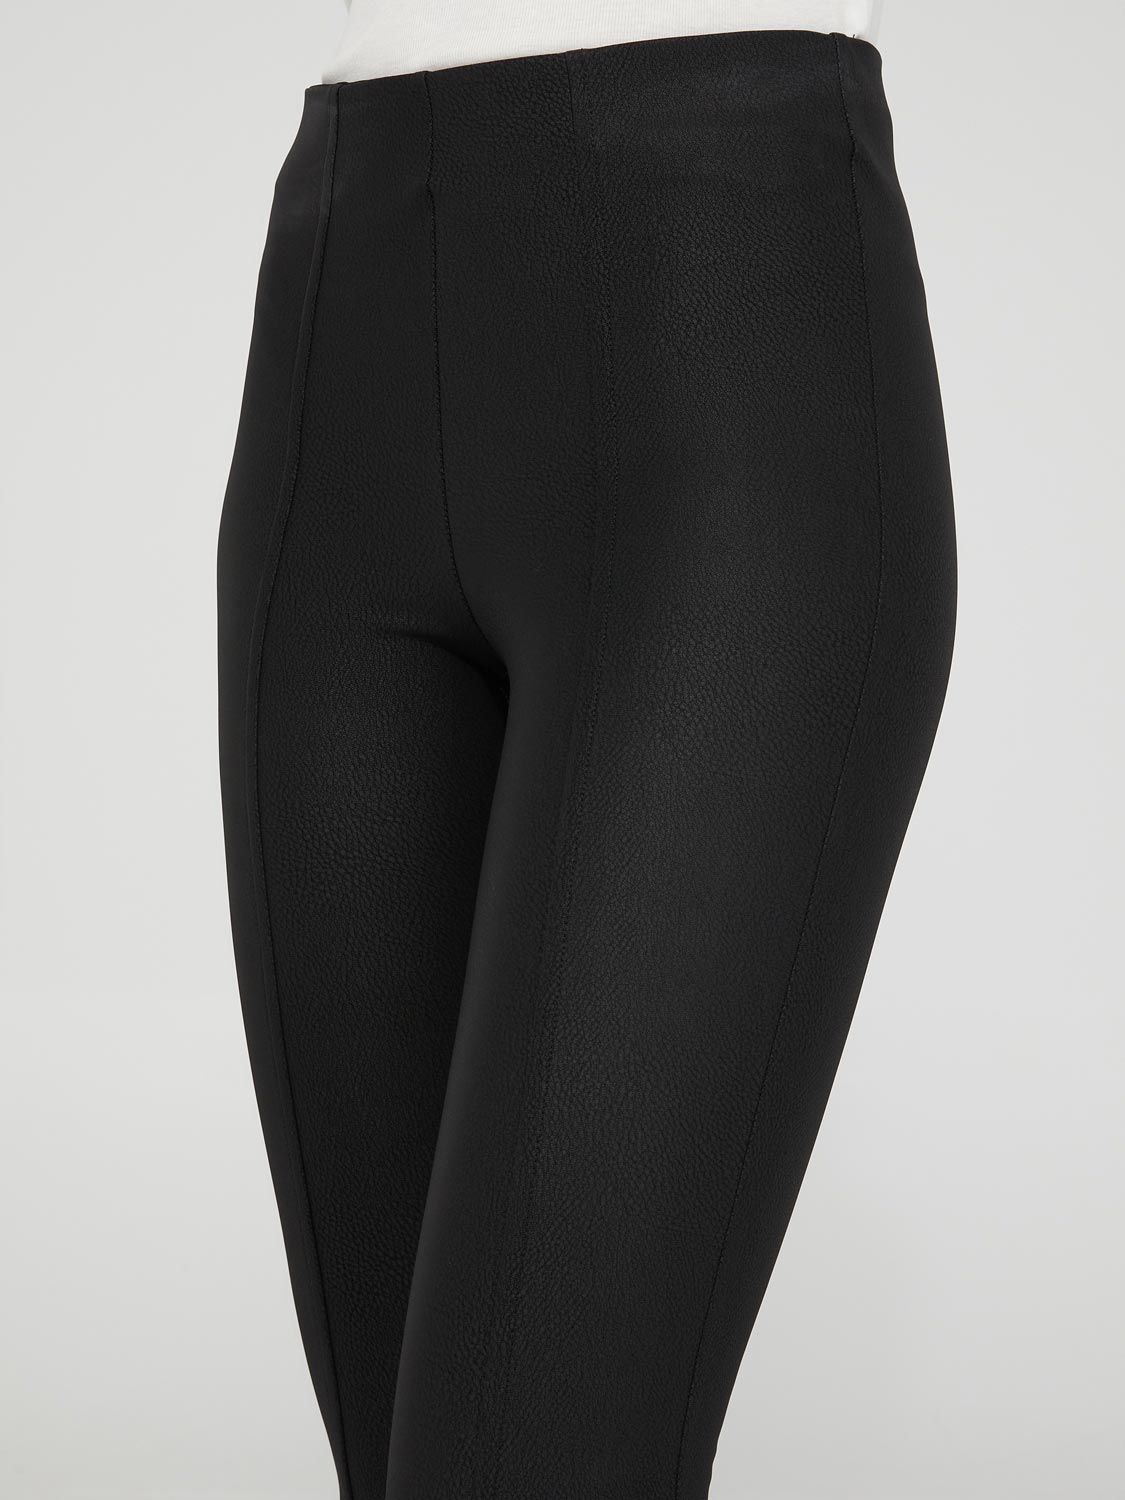 Trousers Jeggings: Faux Leather Look Skinny PAM - Black - Soya Concept:  Waist:38